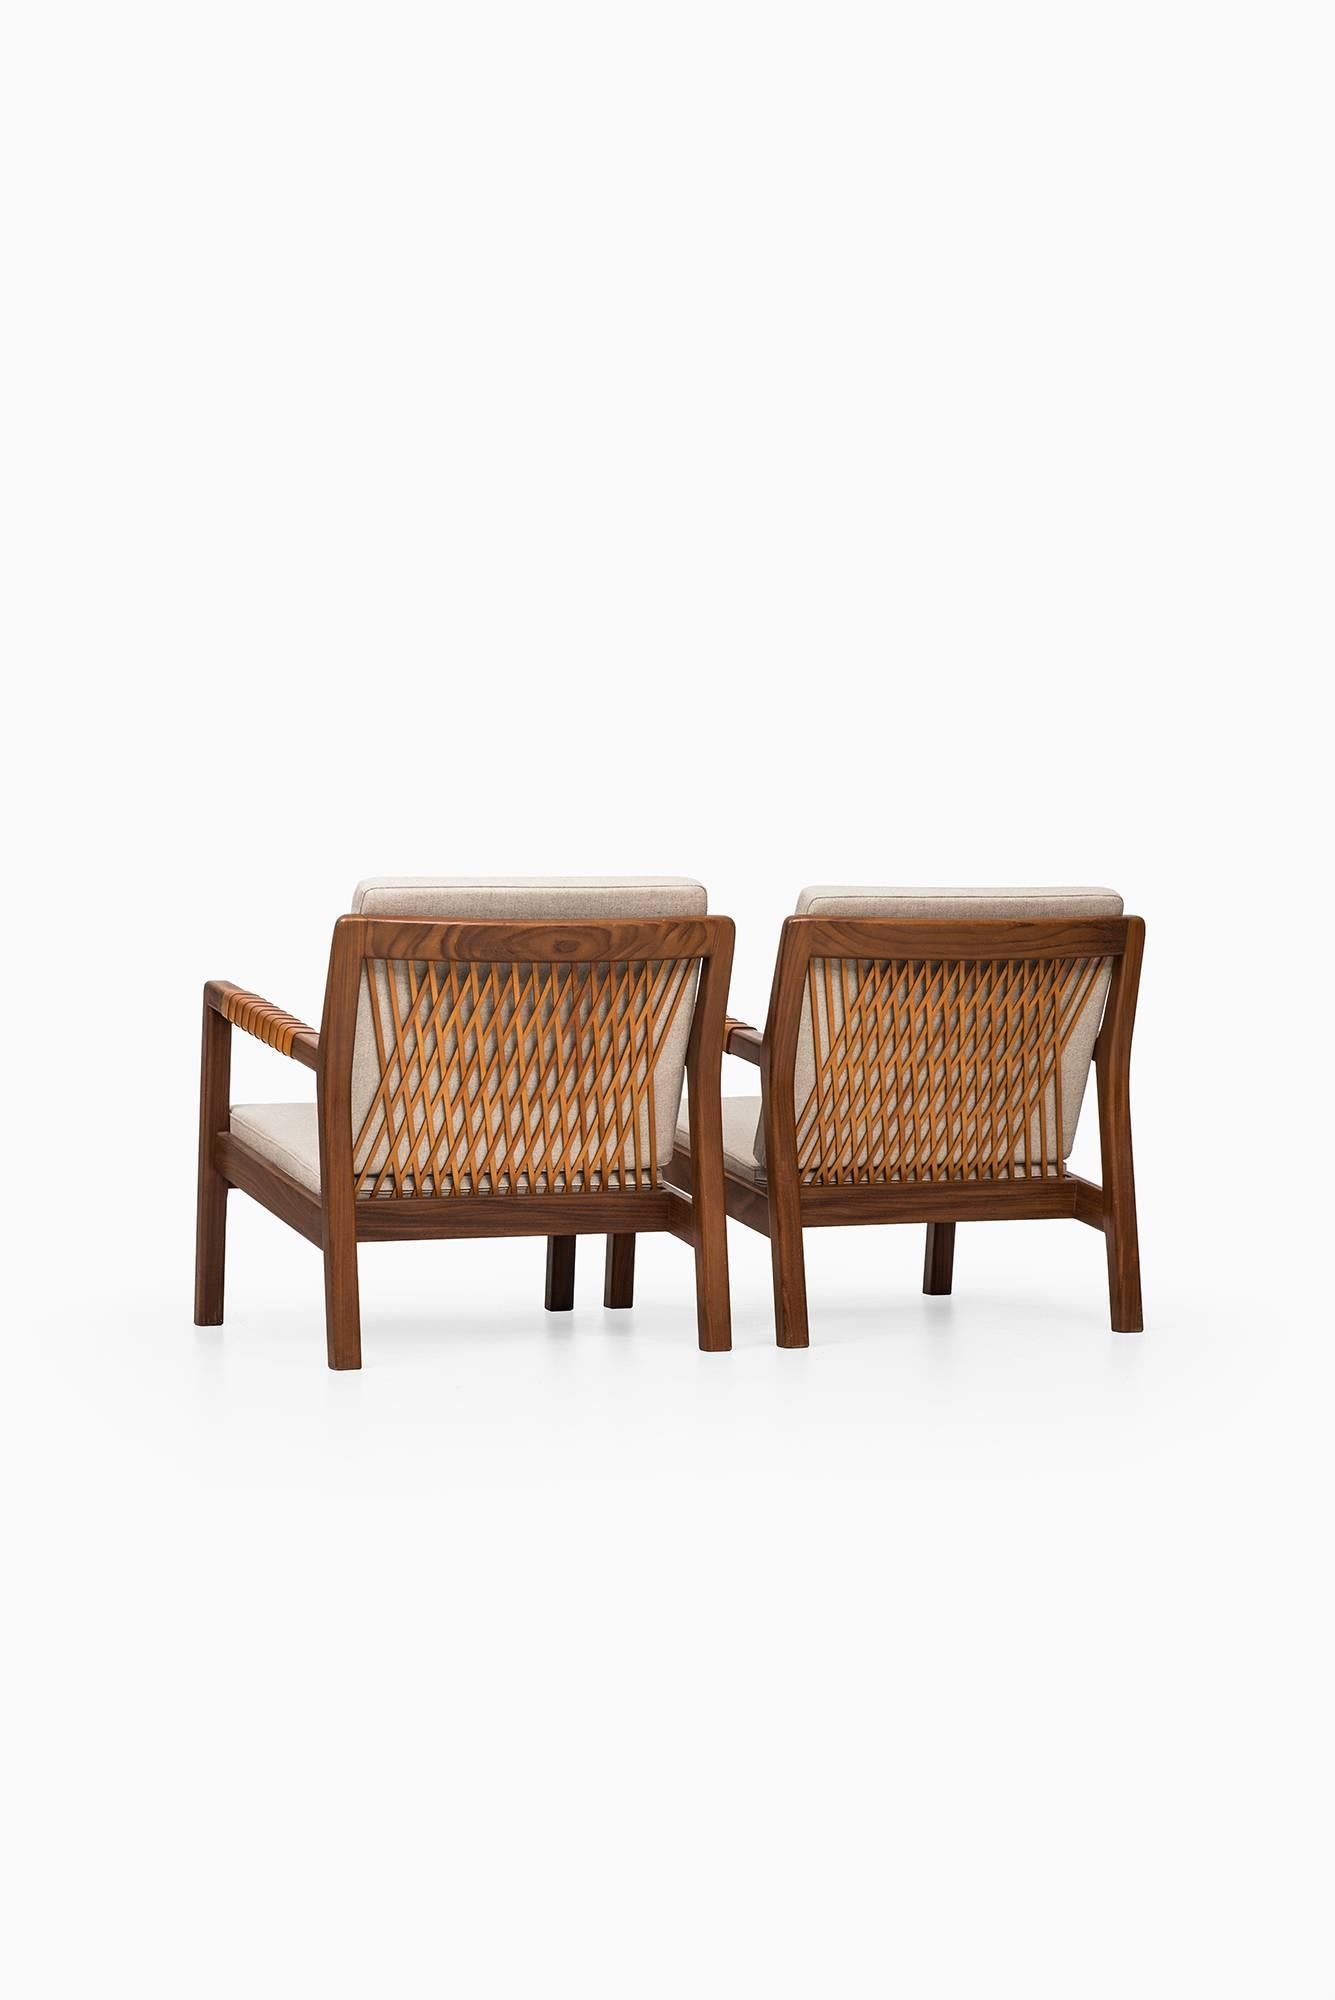 Mid-20th Century Pair of Easy Chairs Model Trienna Designed by Carl Gustaf Hiort Af Ornäs